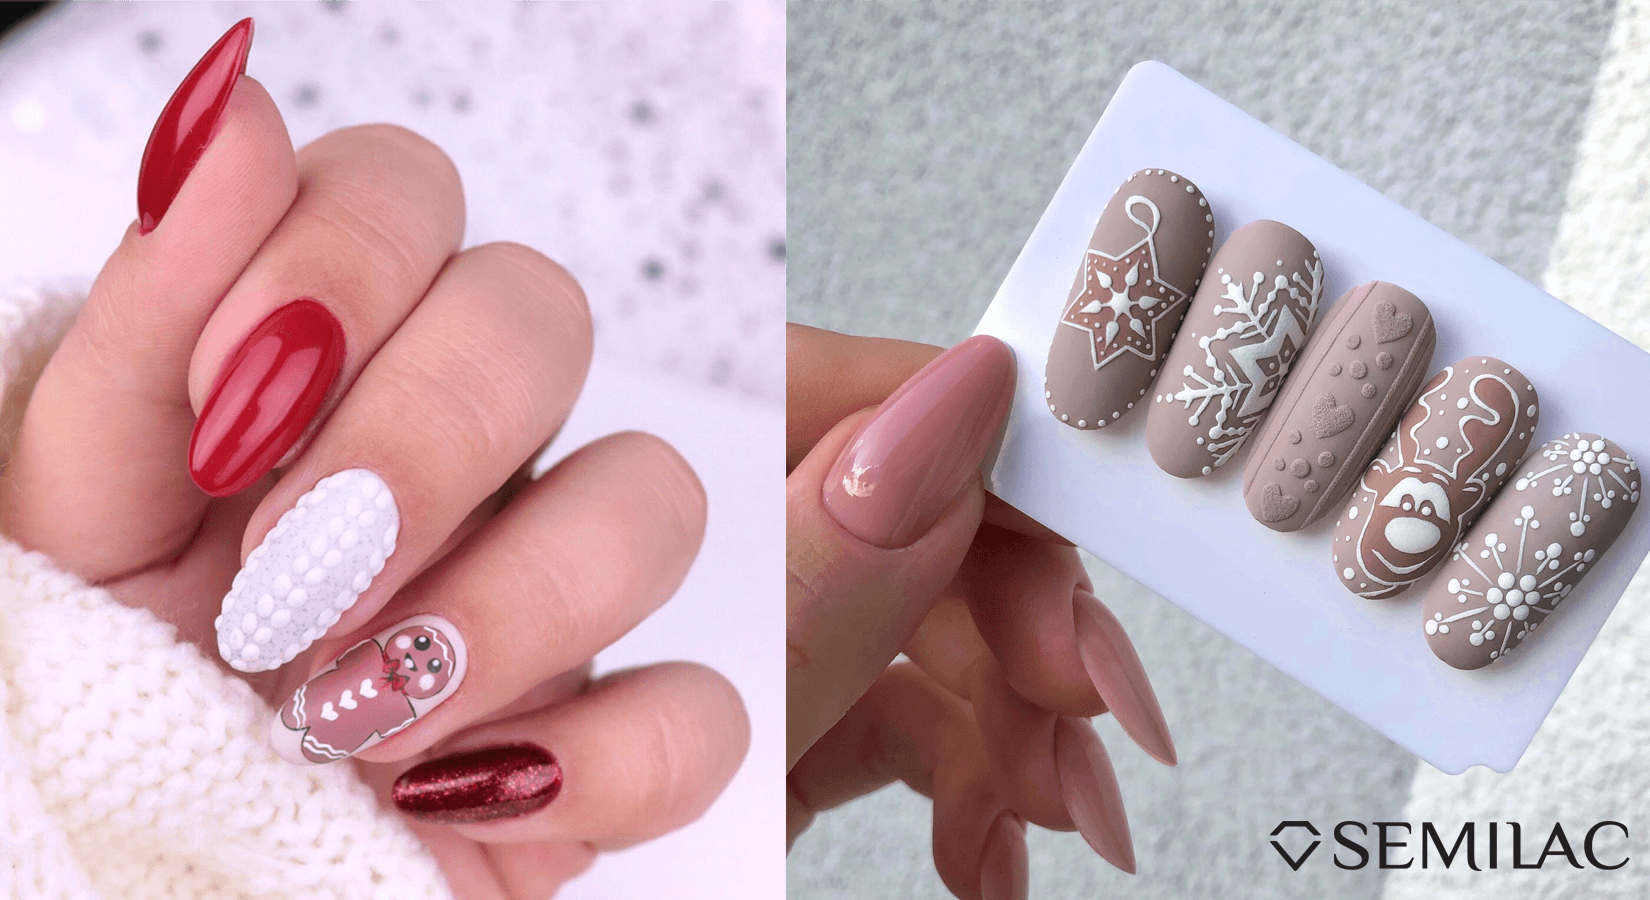 Winter UV Gel Nails: Stay Trendy and Season-Ready with These Nail Art Ideas